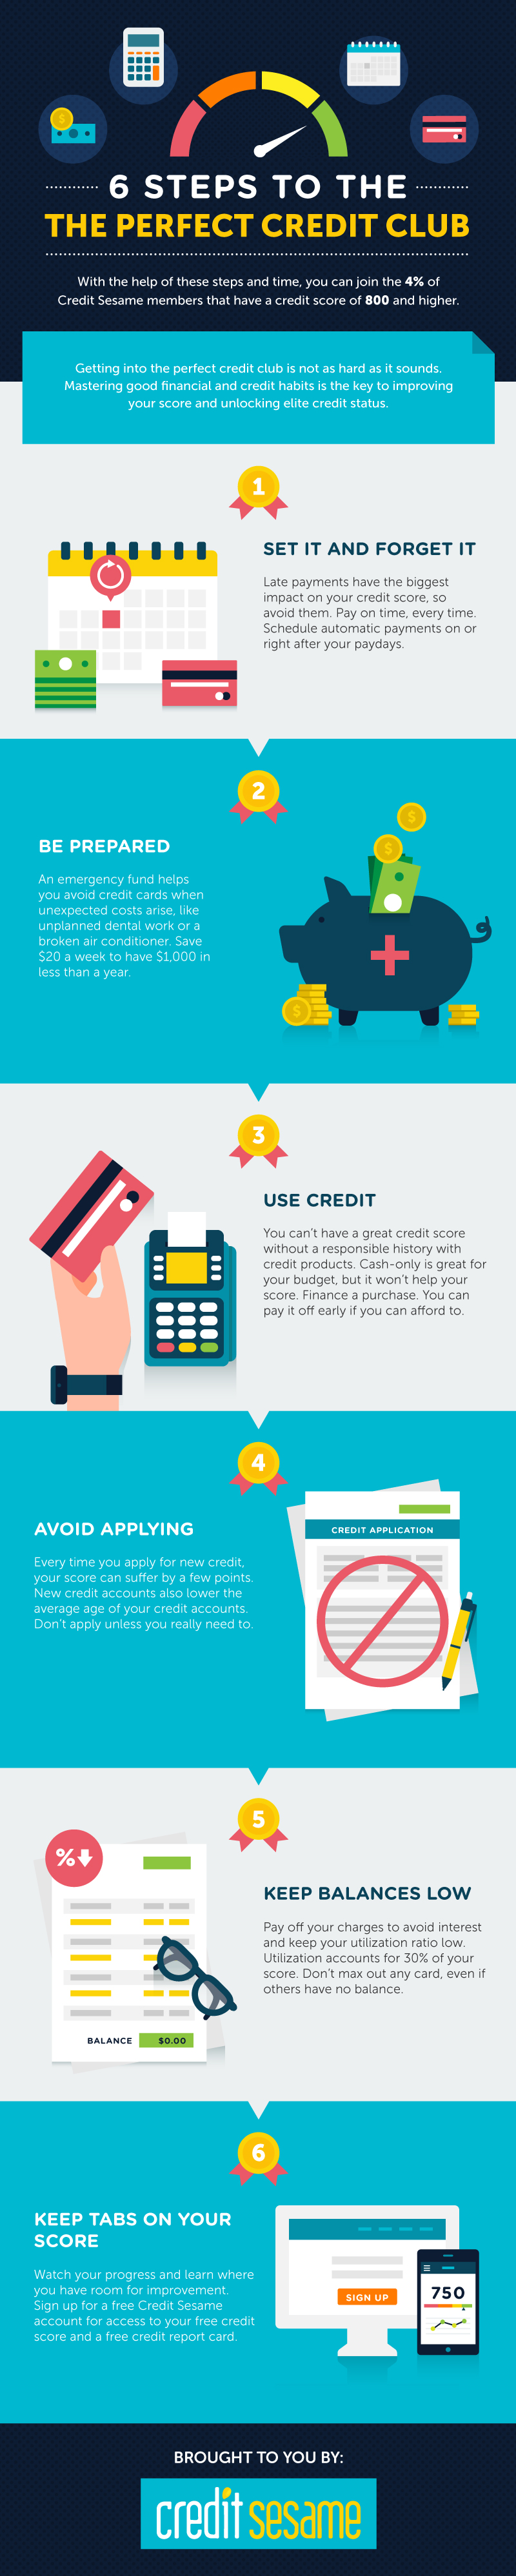 Infographic for 6 Steps to The Perfect Credit Club